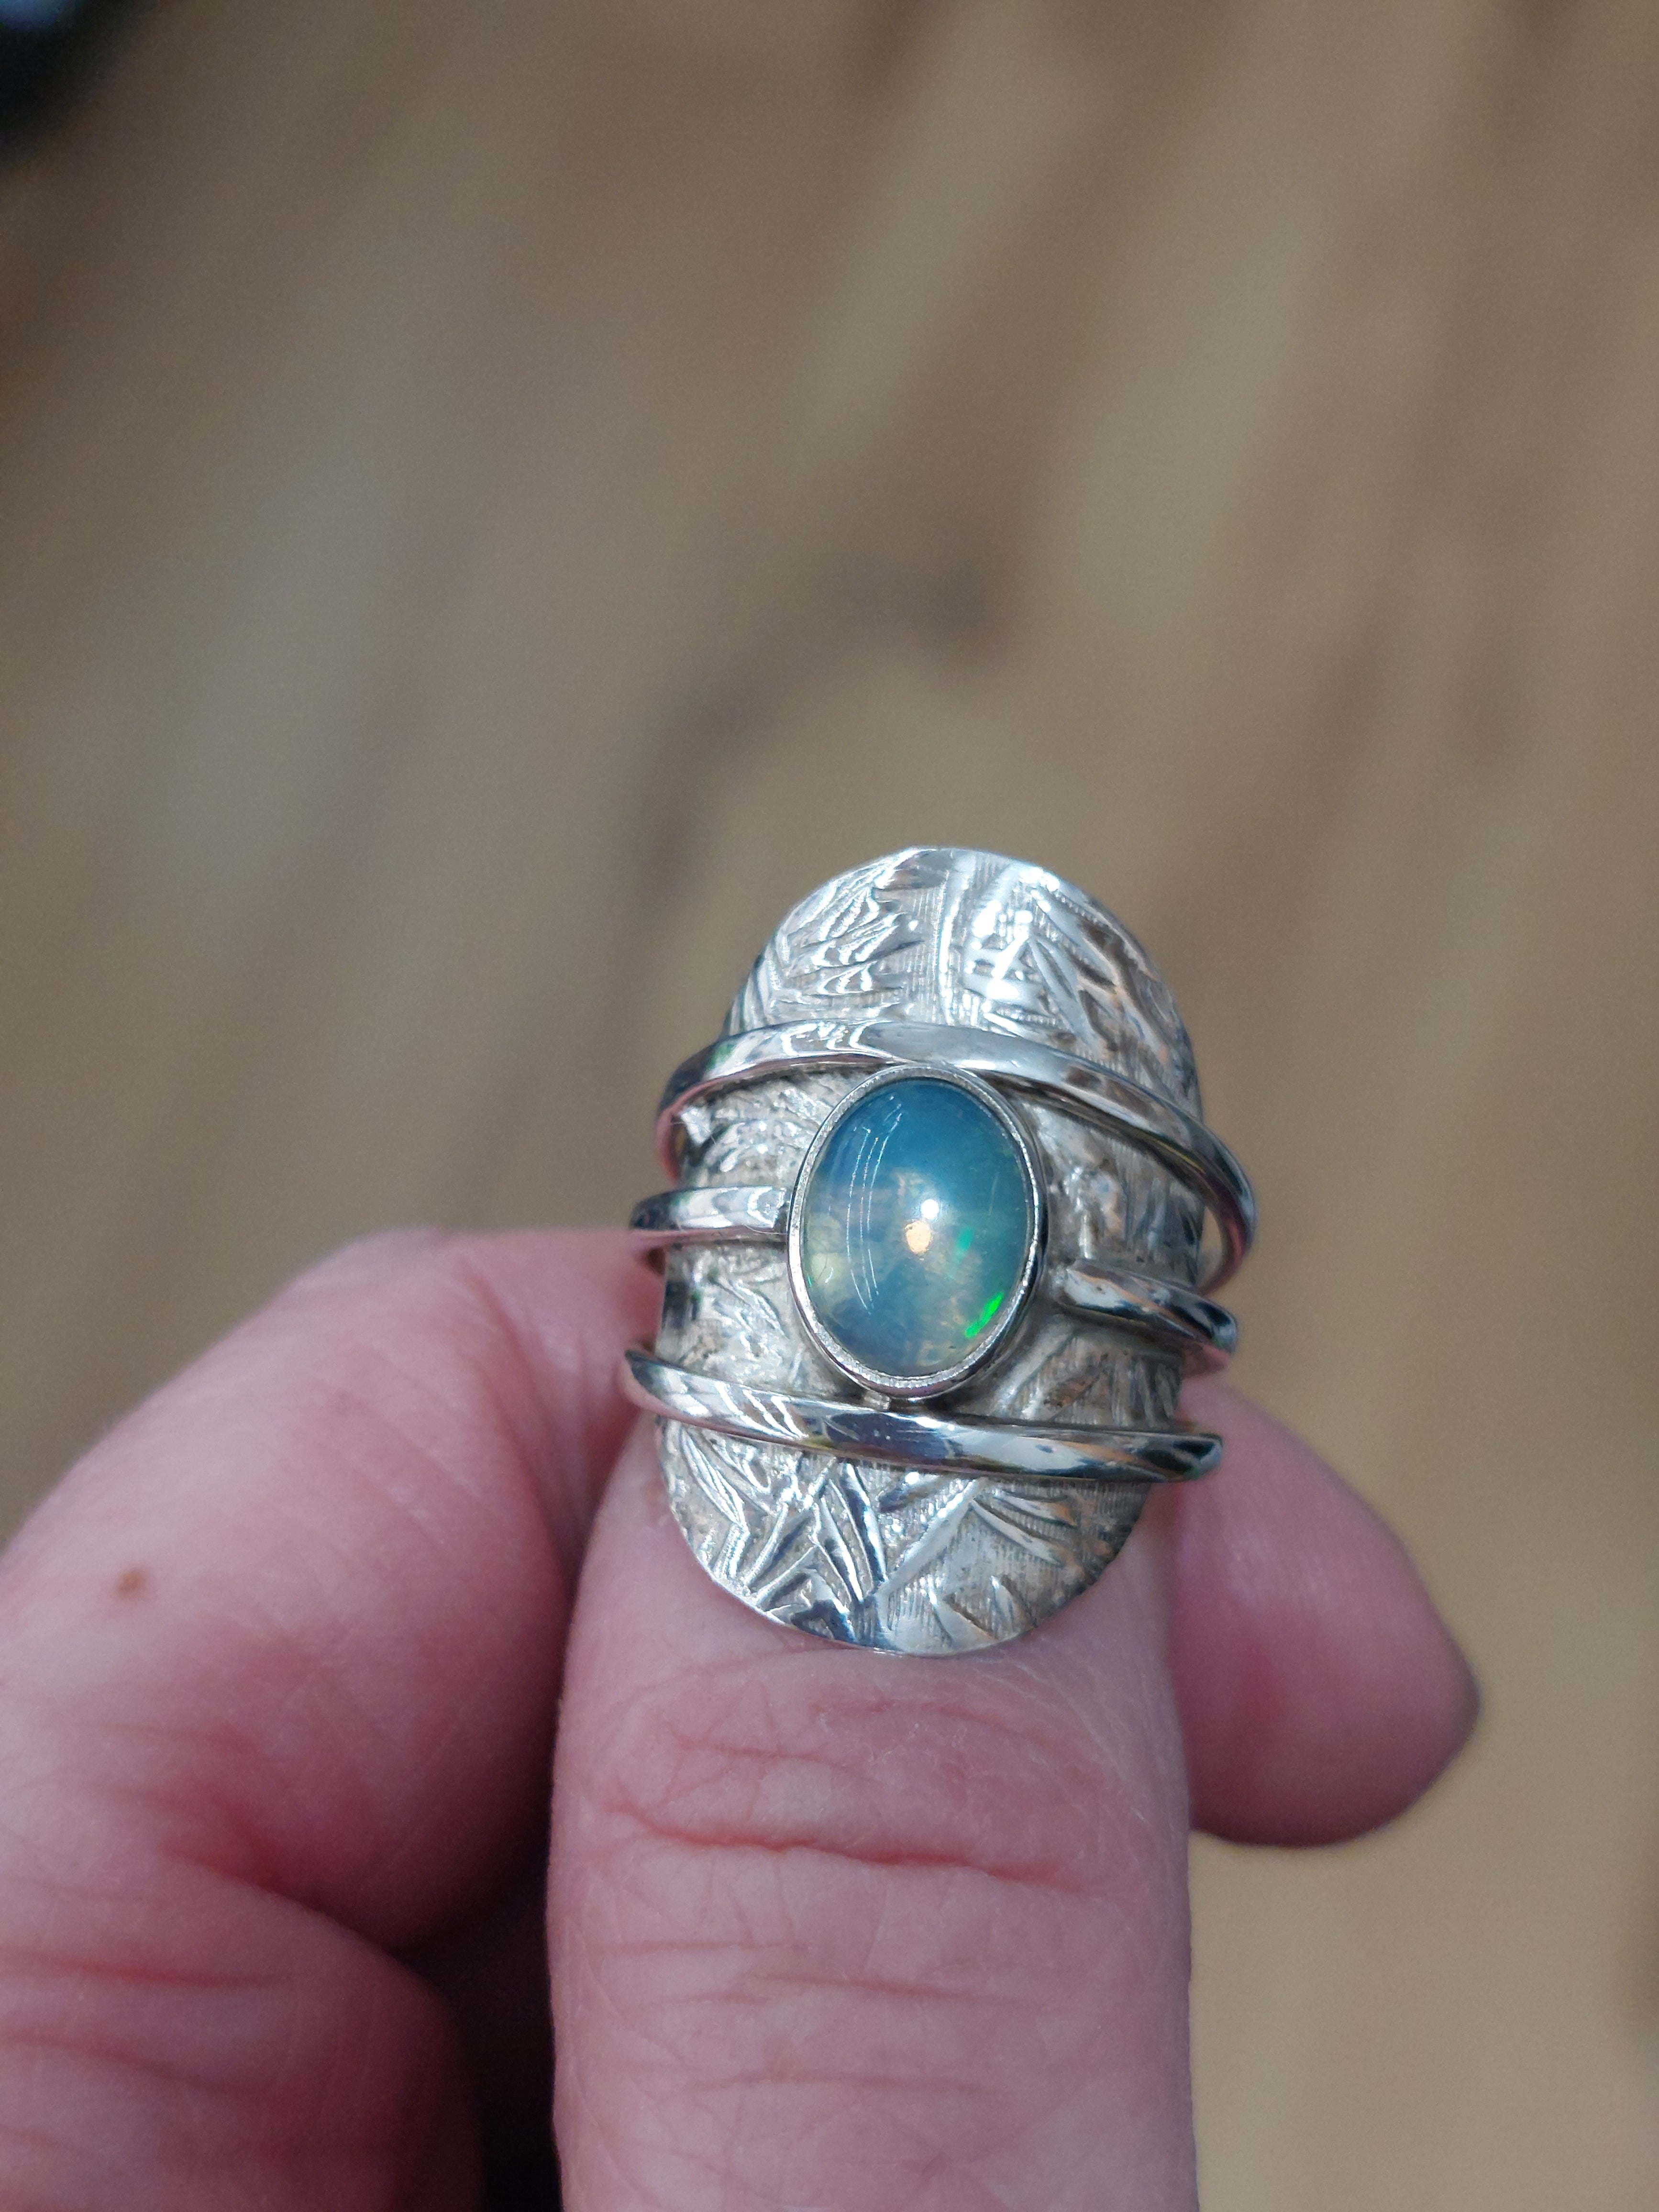 Oval Opal Engraved Silver Ring - Size 8 - 925 Sterling Silver